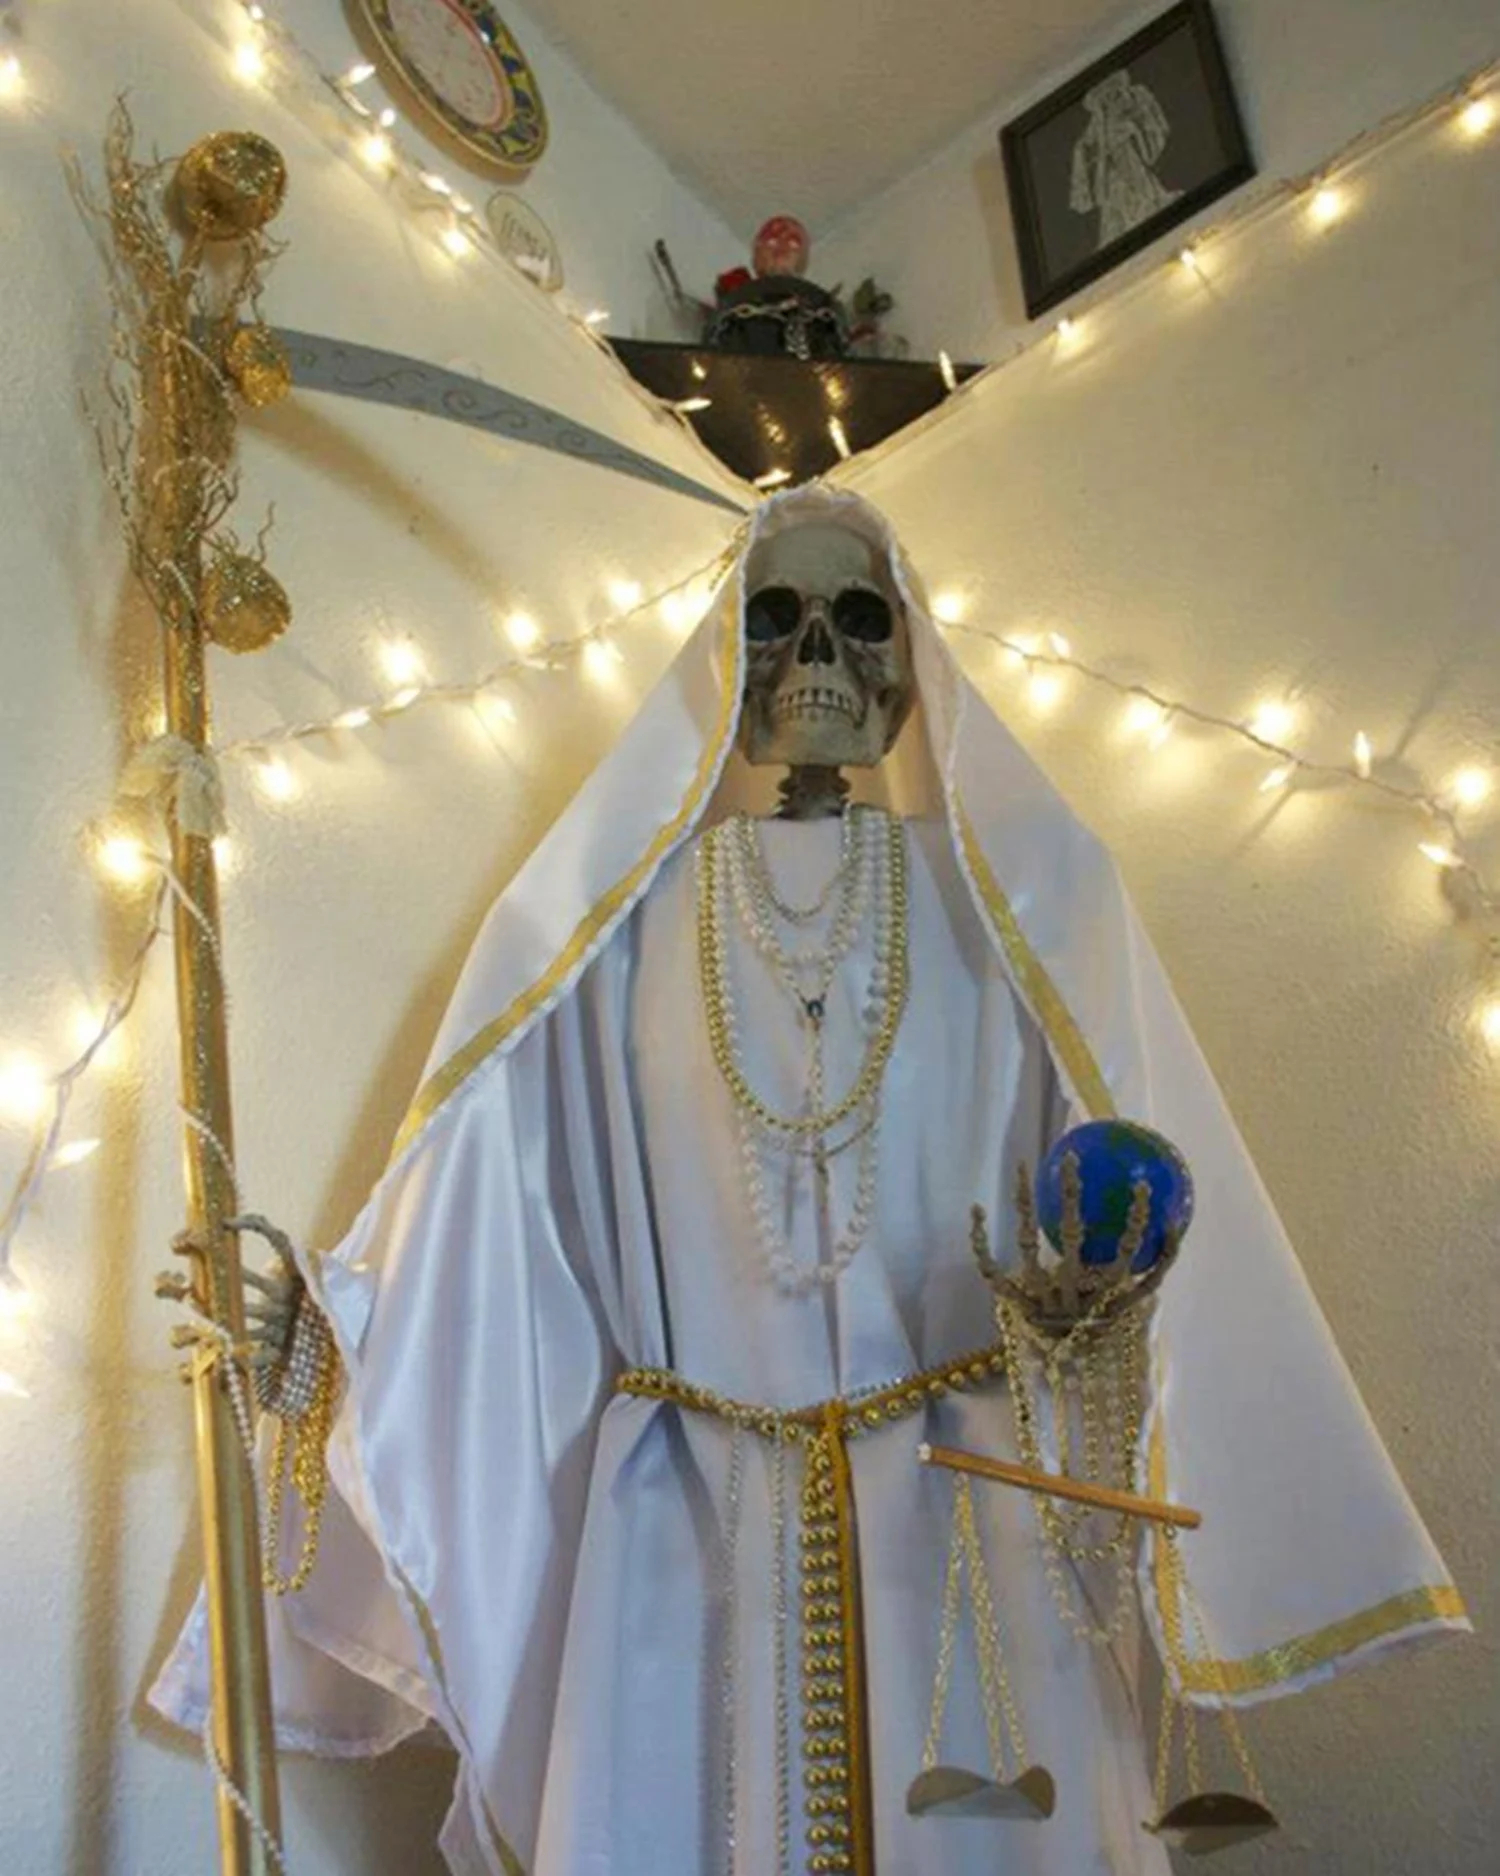 A skeleton wearing a white cloak, holding an ax, and wearing jewelry symbolizing Santa Muerte